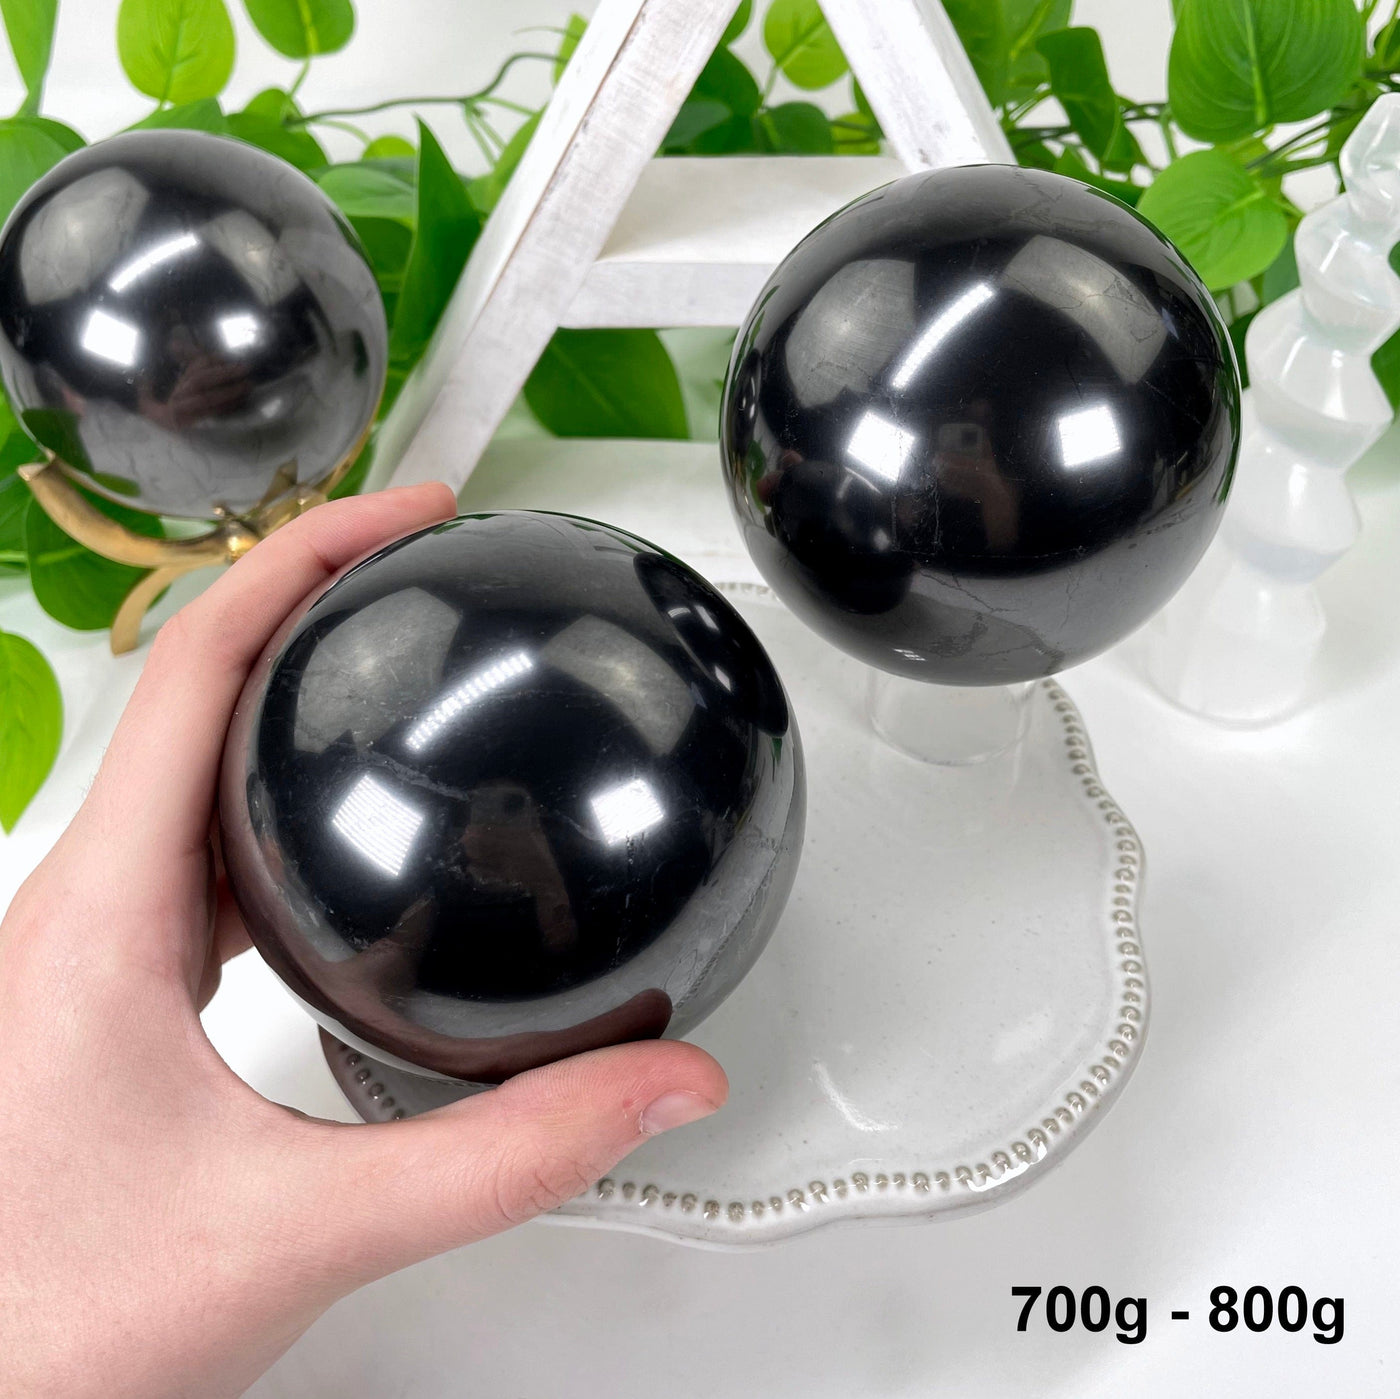 two 700g - 800g shungite polished spheres on display for possible variations with one in hand for size reference